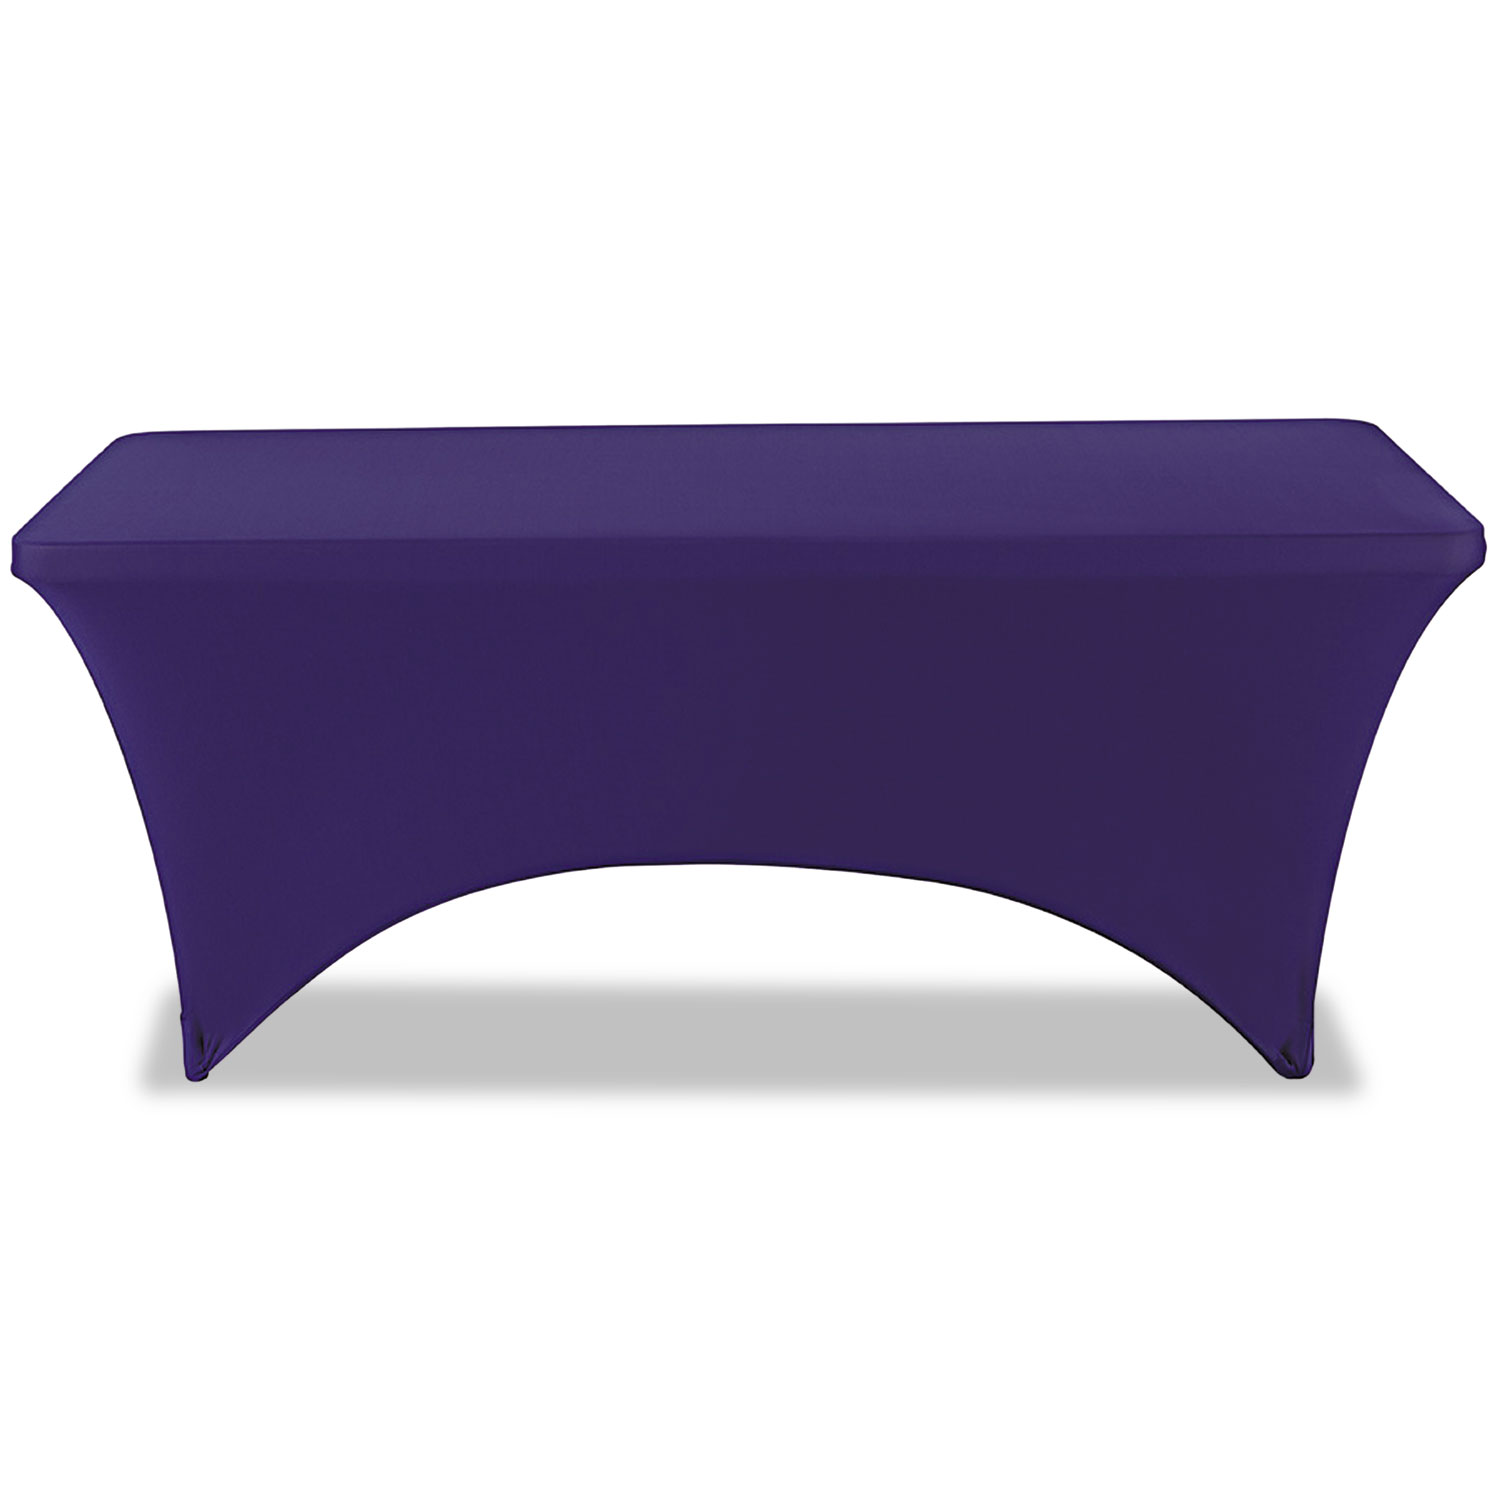 Stretch-Fabric Table Cover, Polyester/Spandex, 30" x 72", Blue